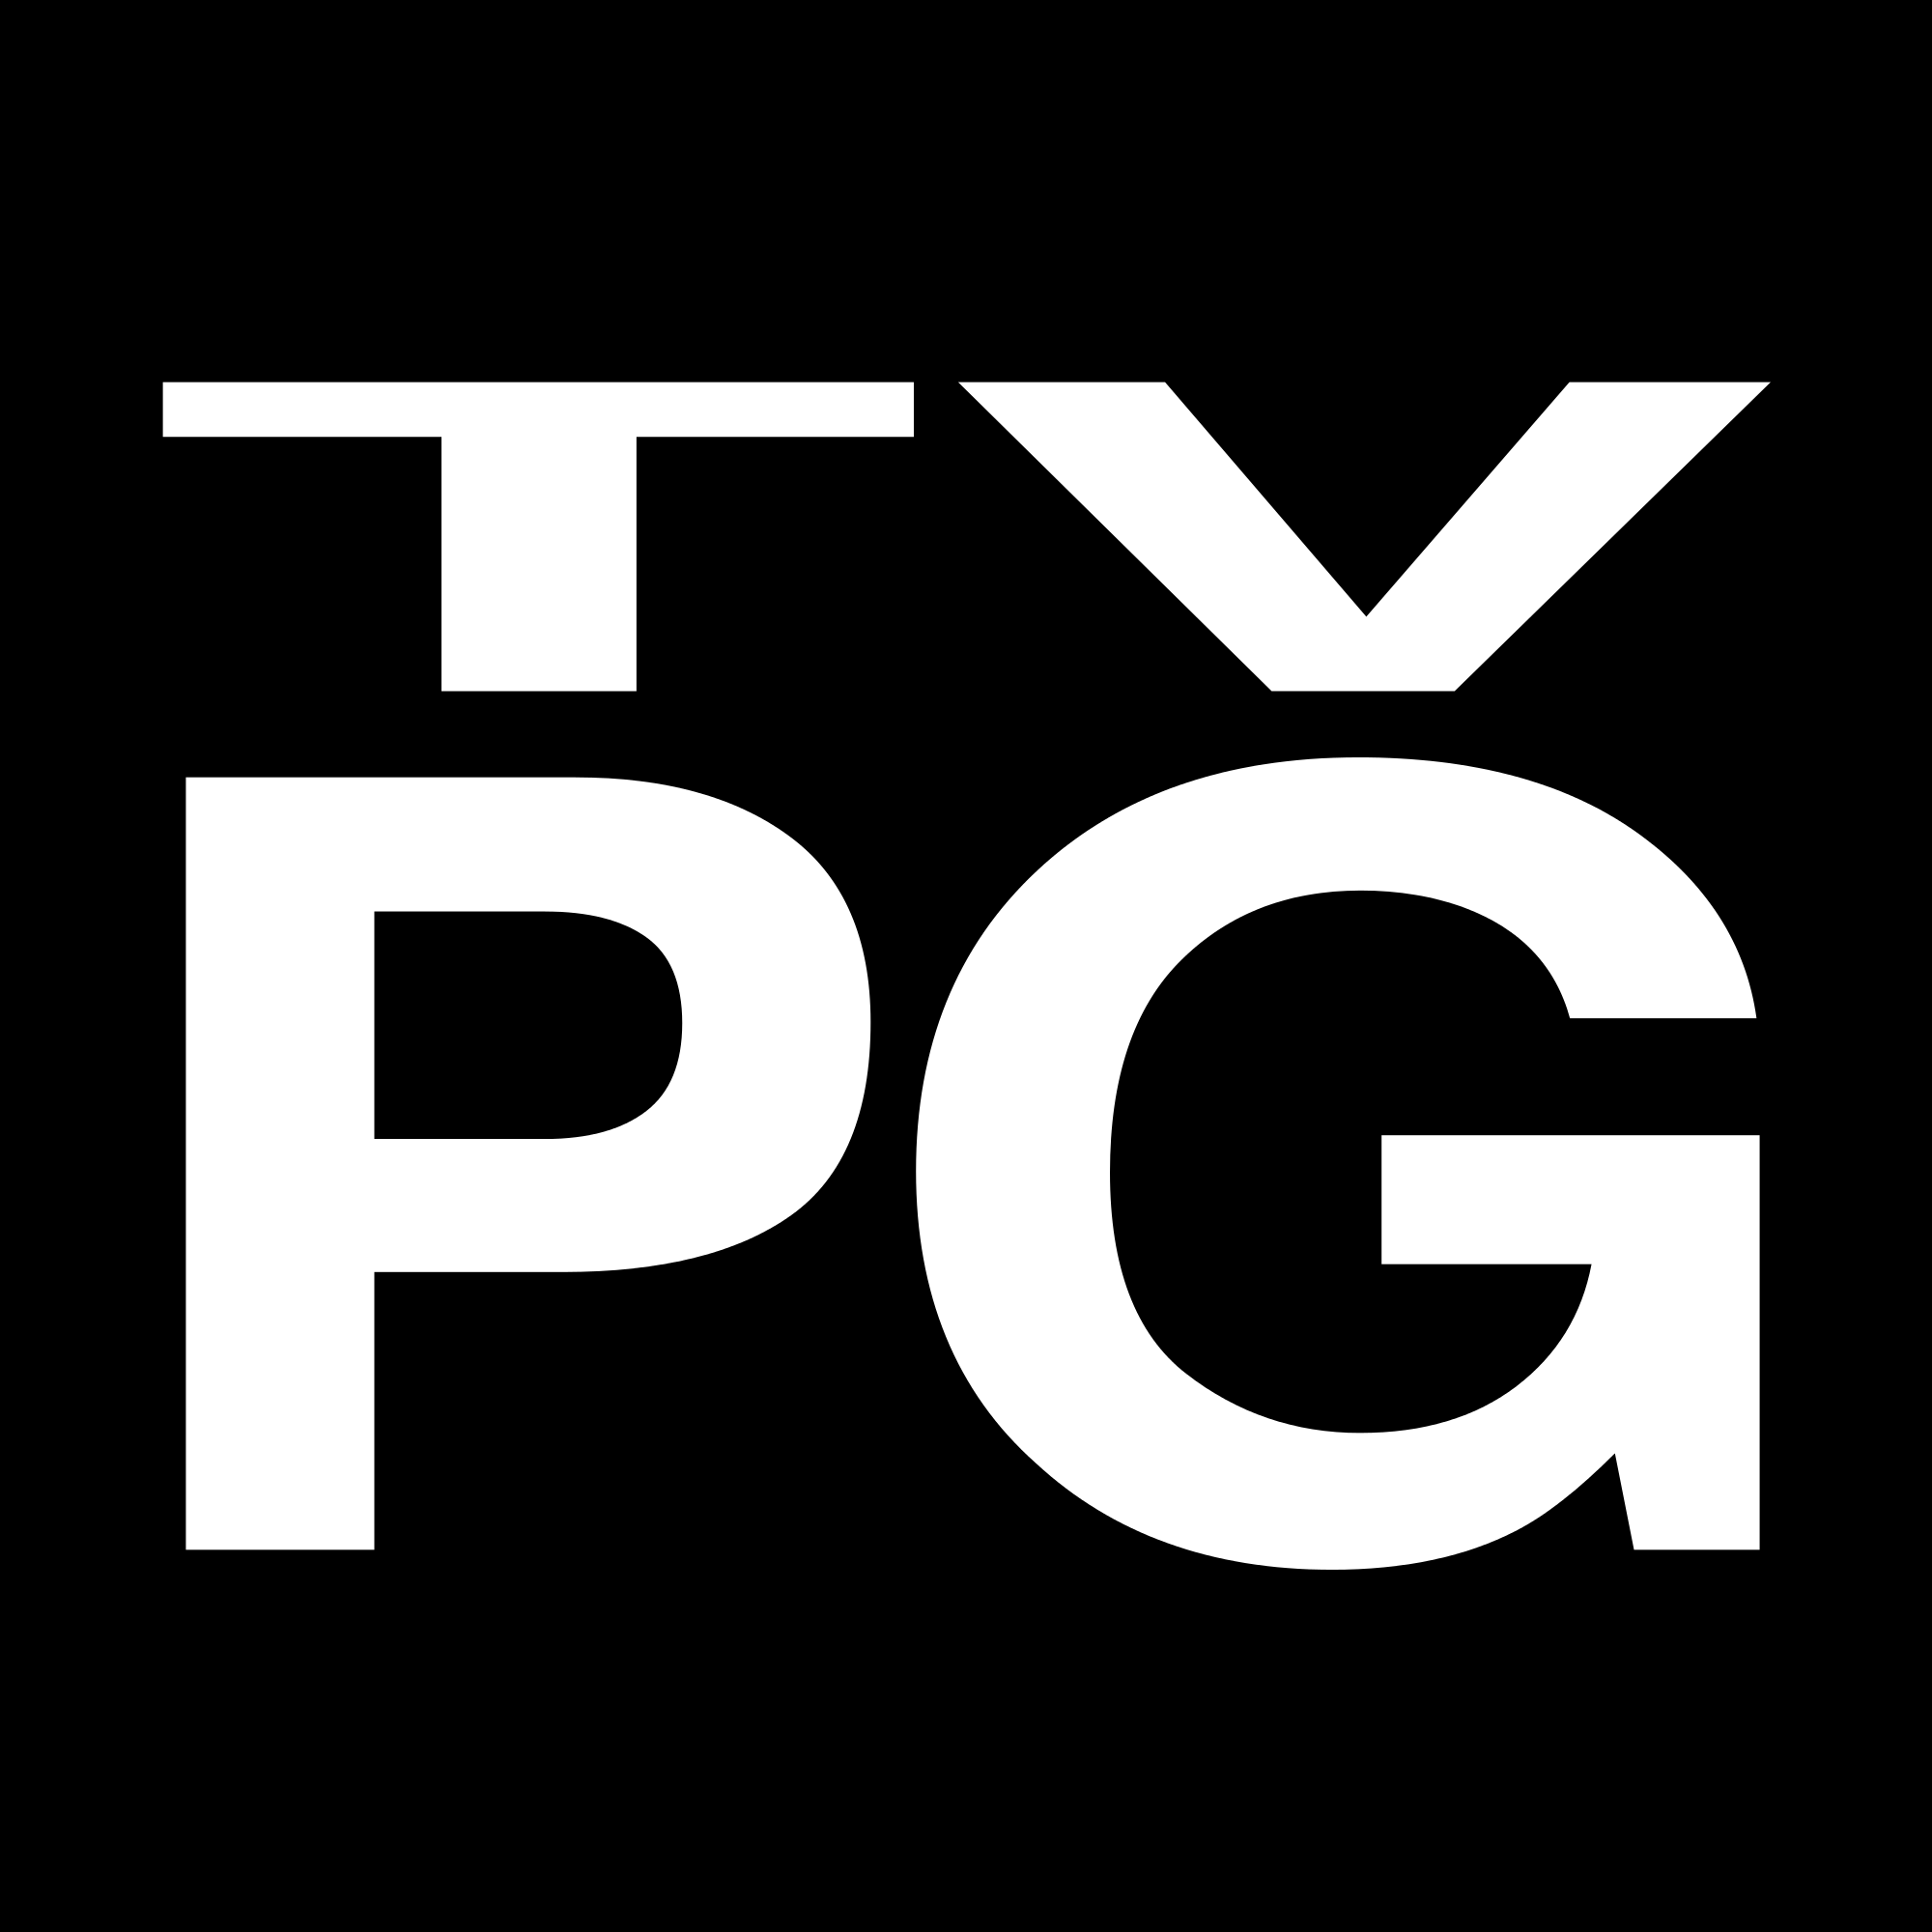 TV-Y7 CC Logo - File:TV-PG icon.svg - Wikimedia Commons